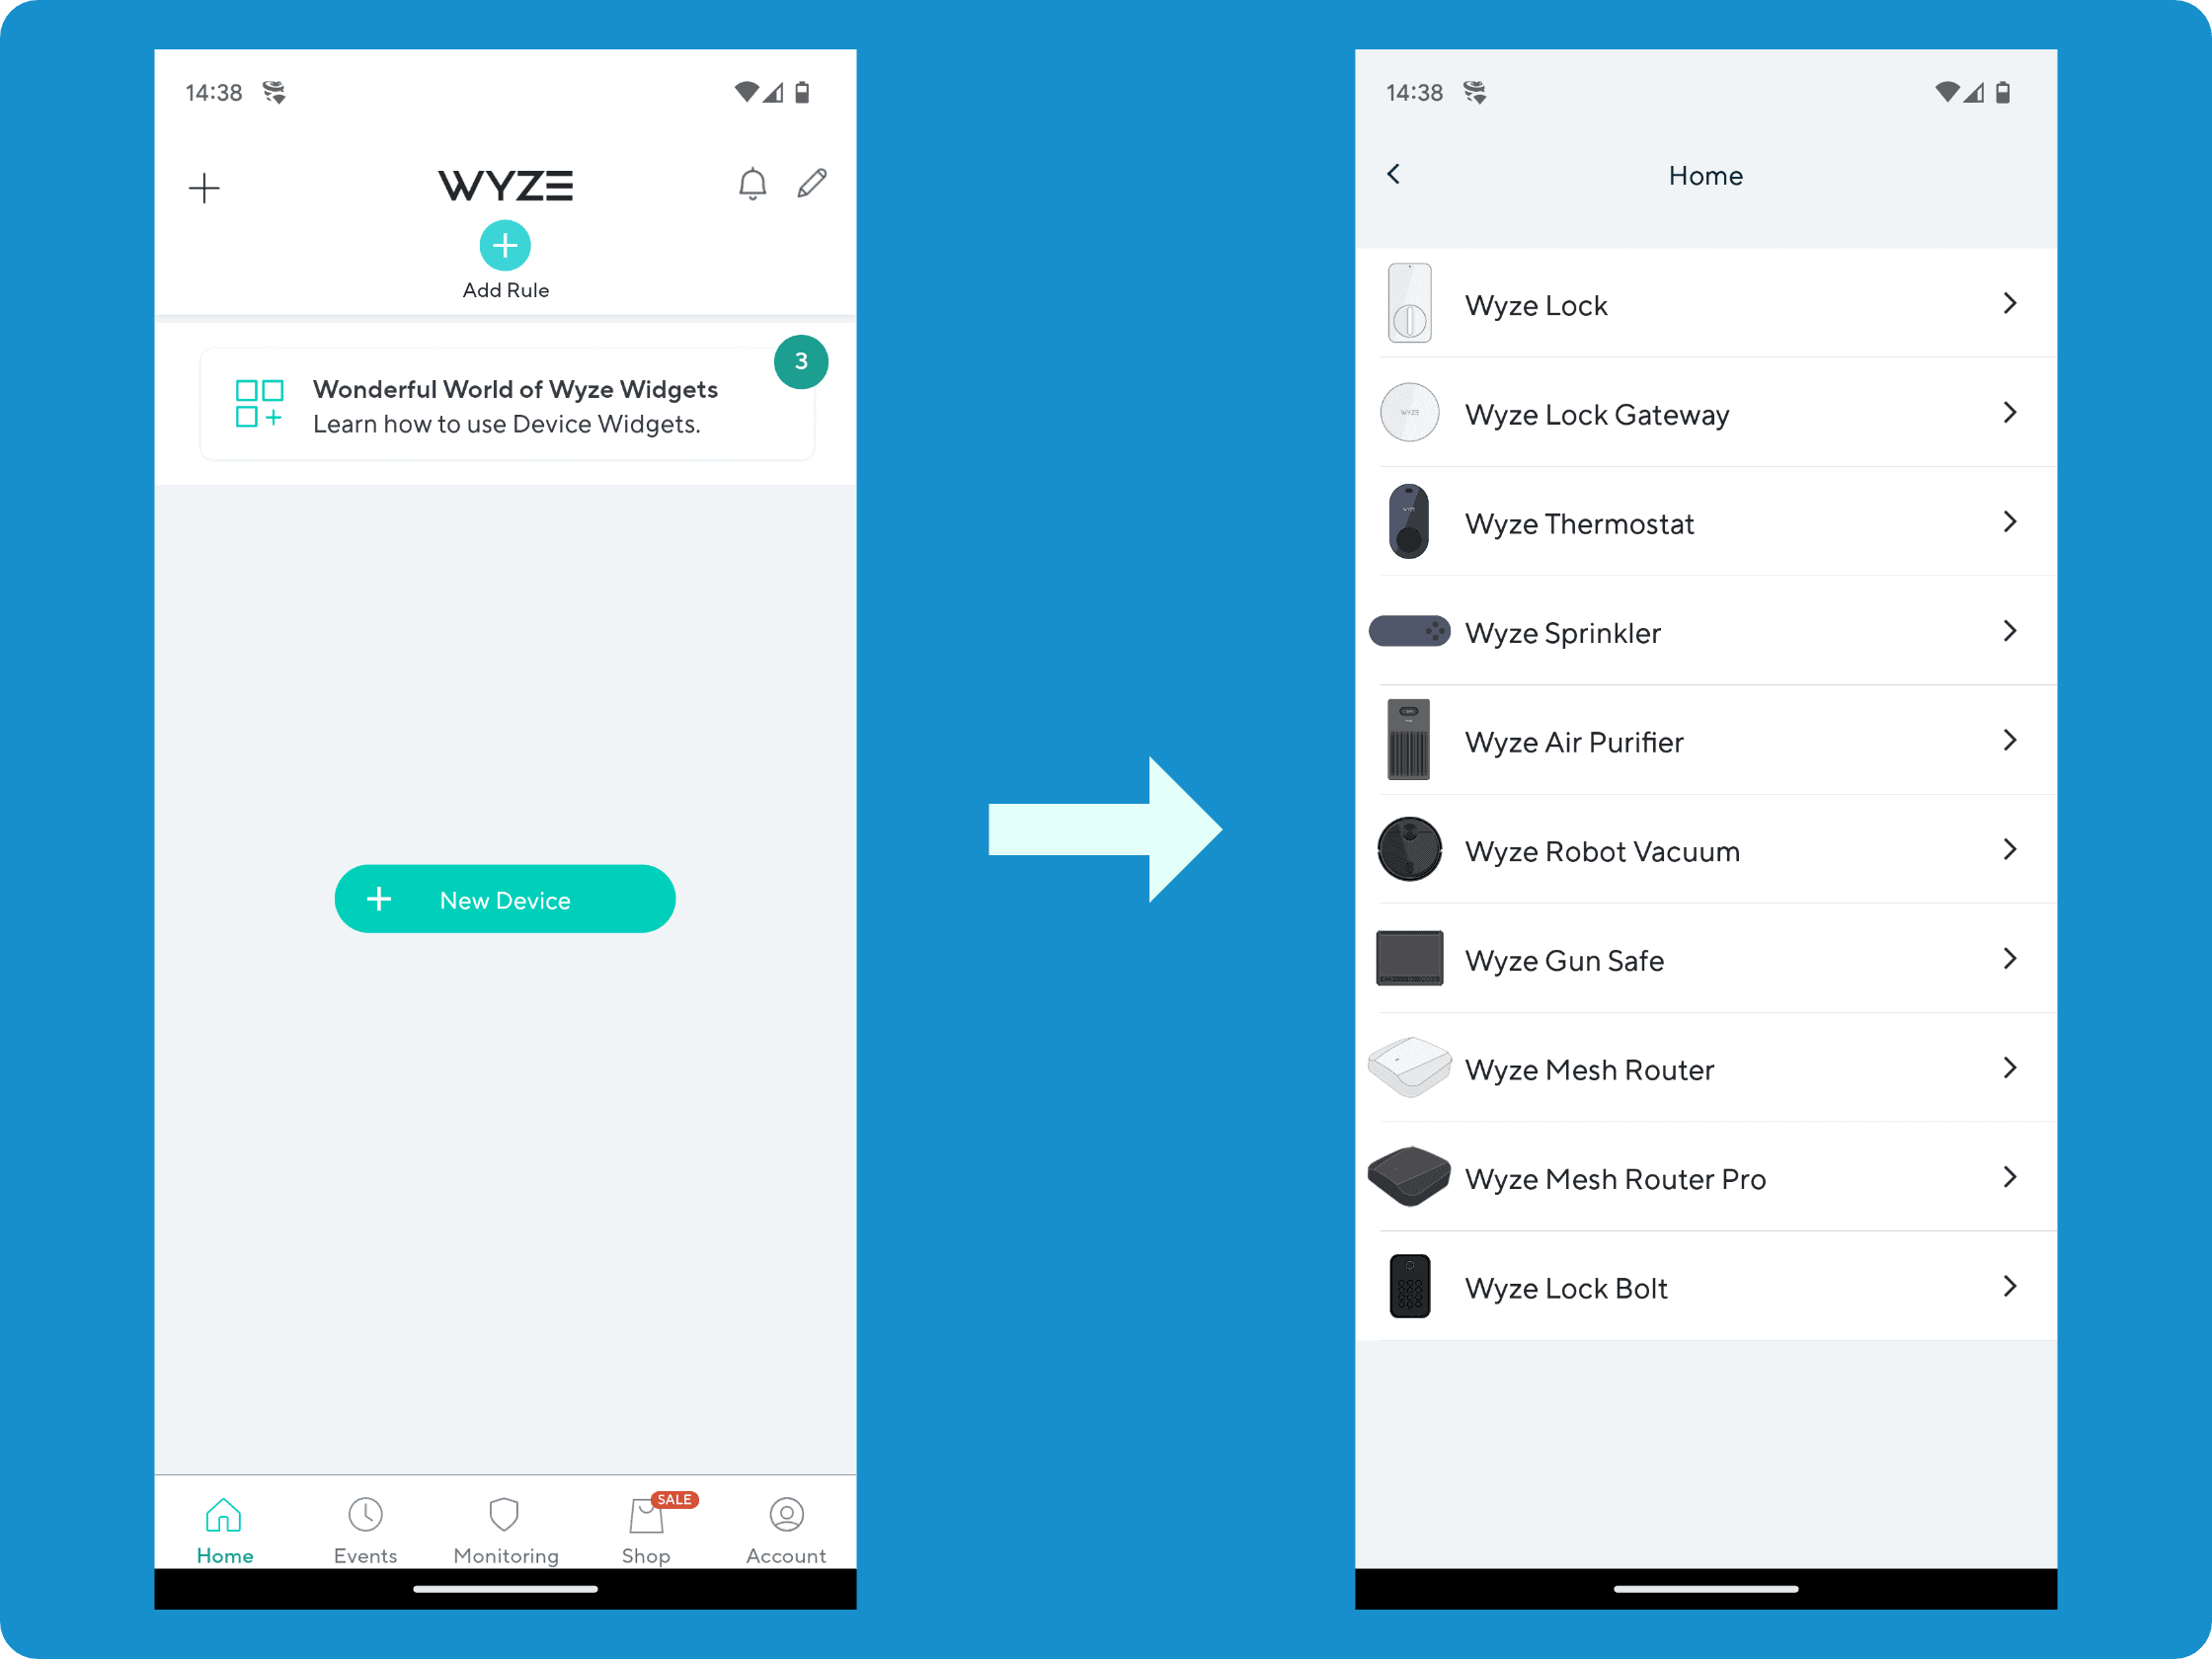 Pairing the Wyze Lock Bolt with Wyze’s app was a 2-minute operation